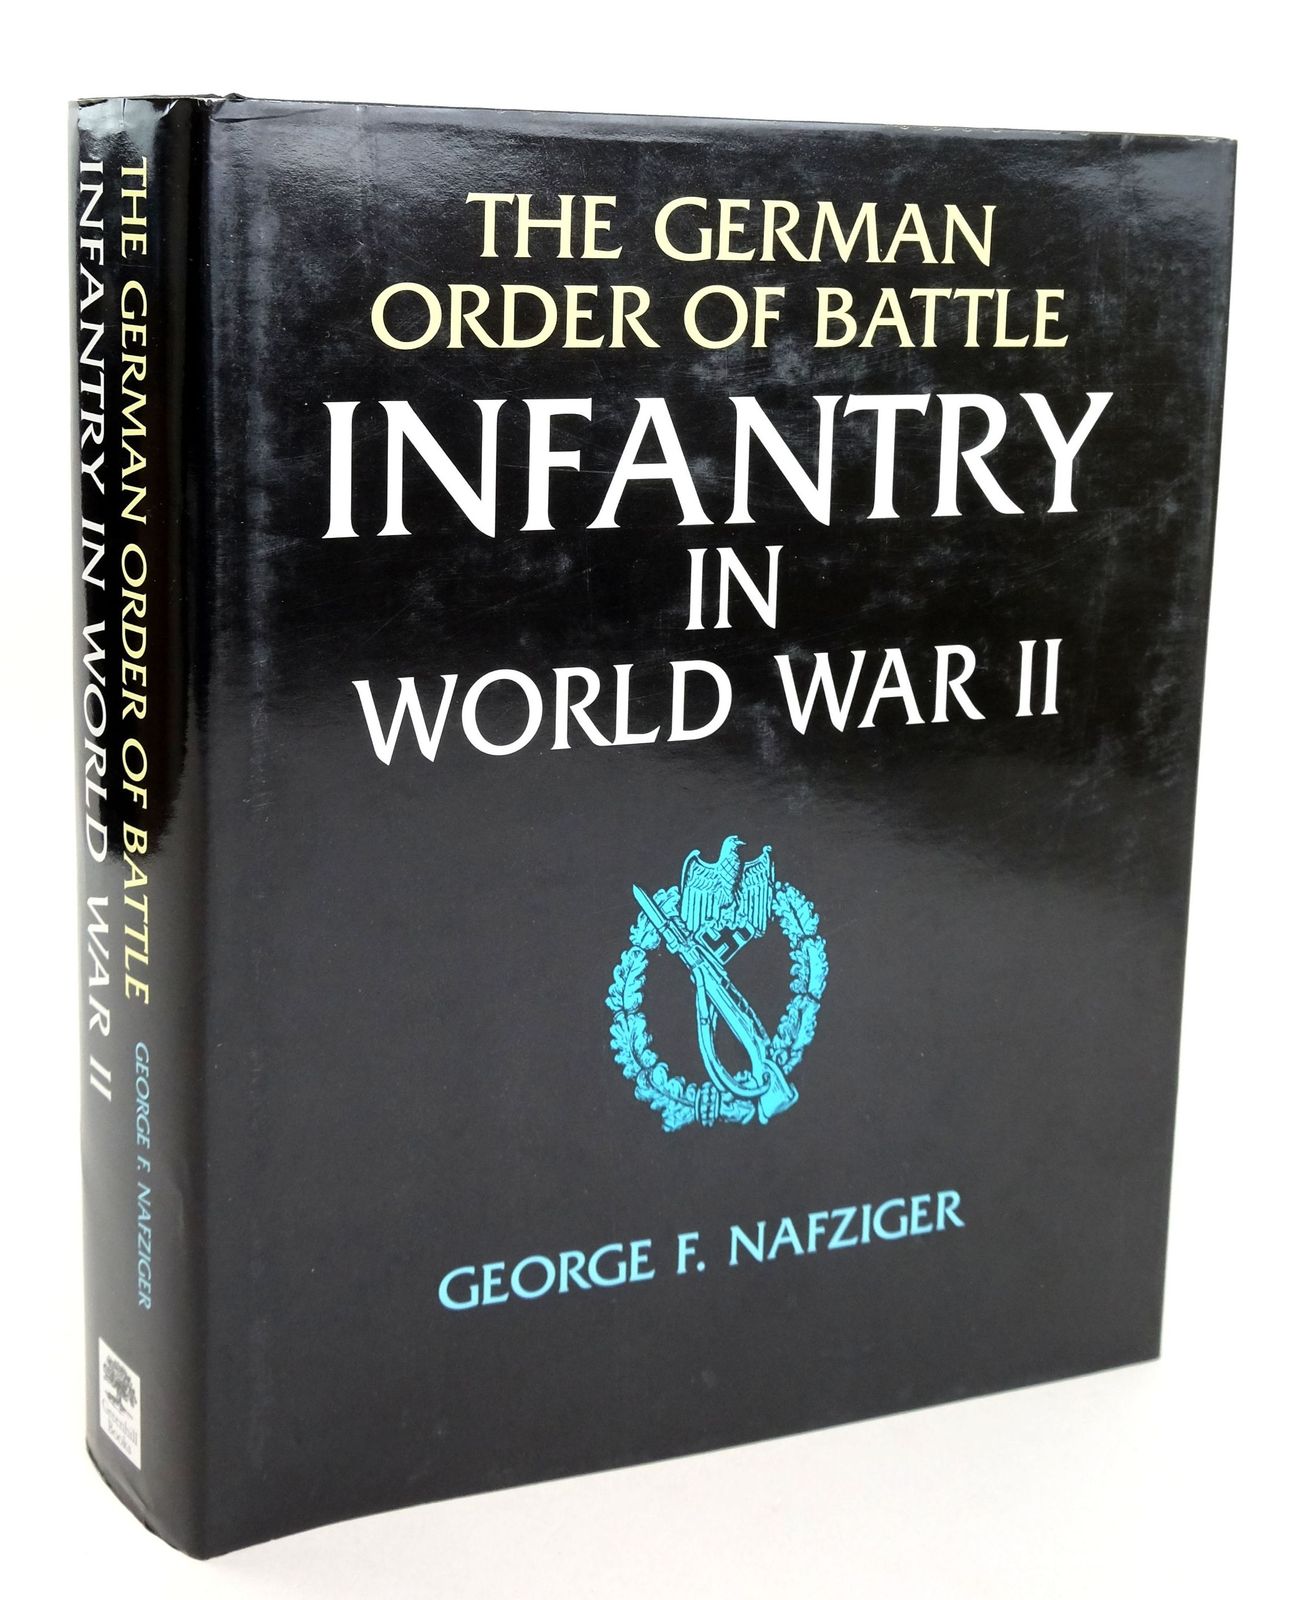 Photo of THE GERMAN ORDER OF BATTLE INFANTRY IN WORLD WAR II written by Nafziger, George published by Greenhill Books (STOCK CODE: 1819332)  for sale by Stella & Rose's Books